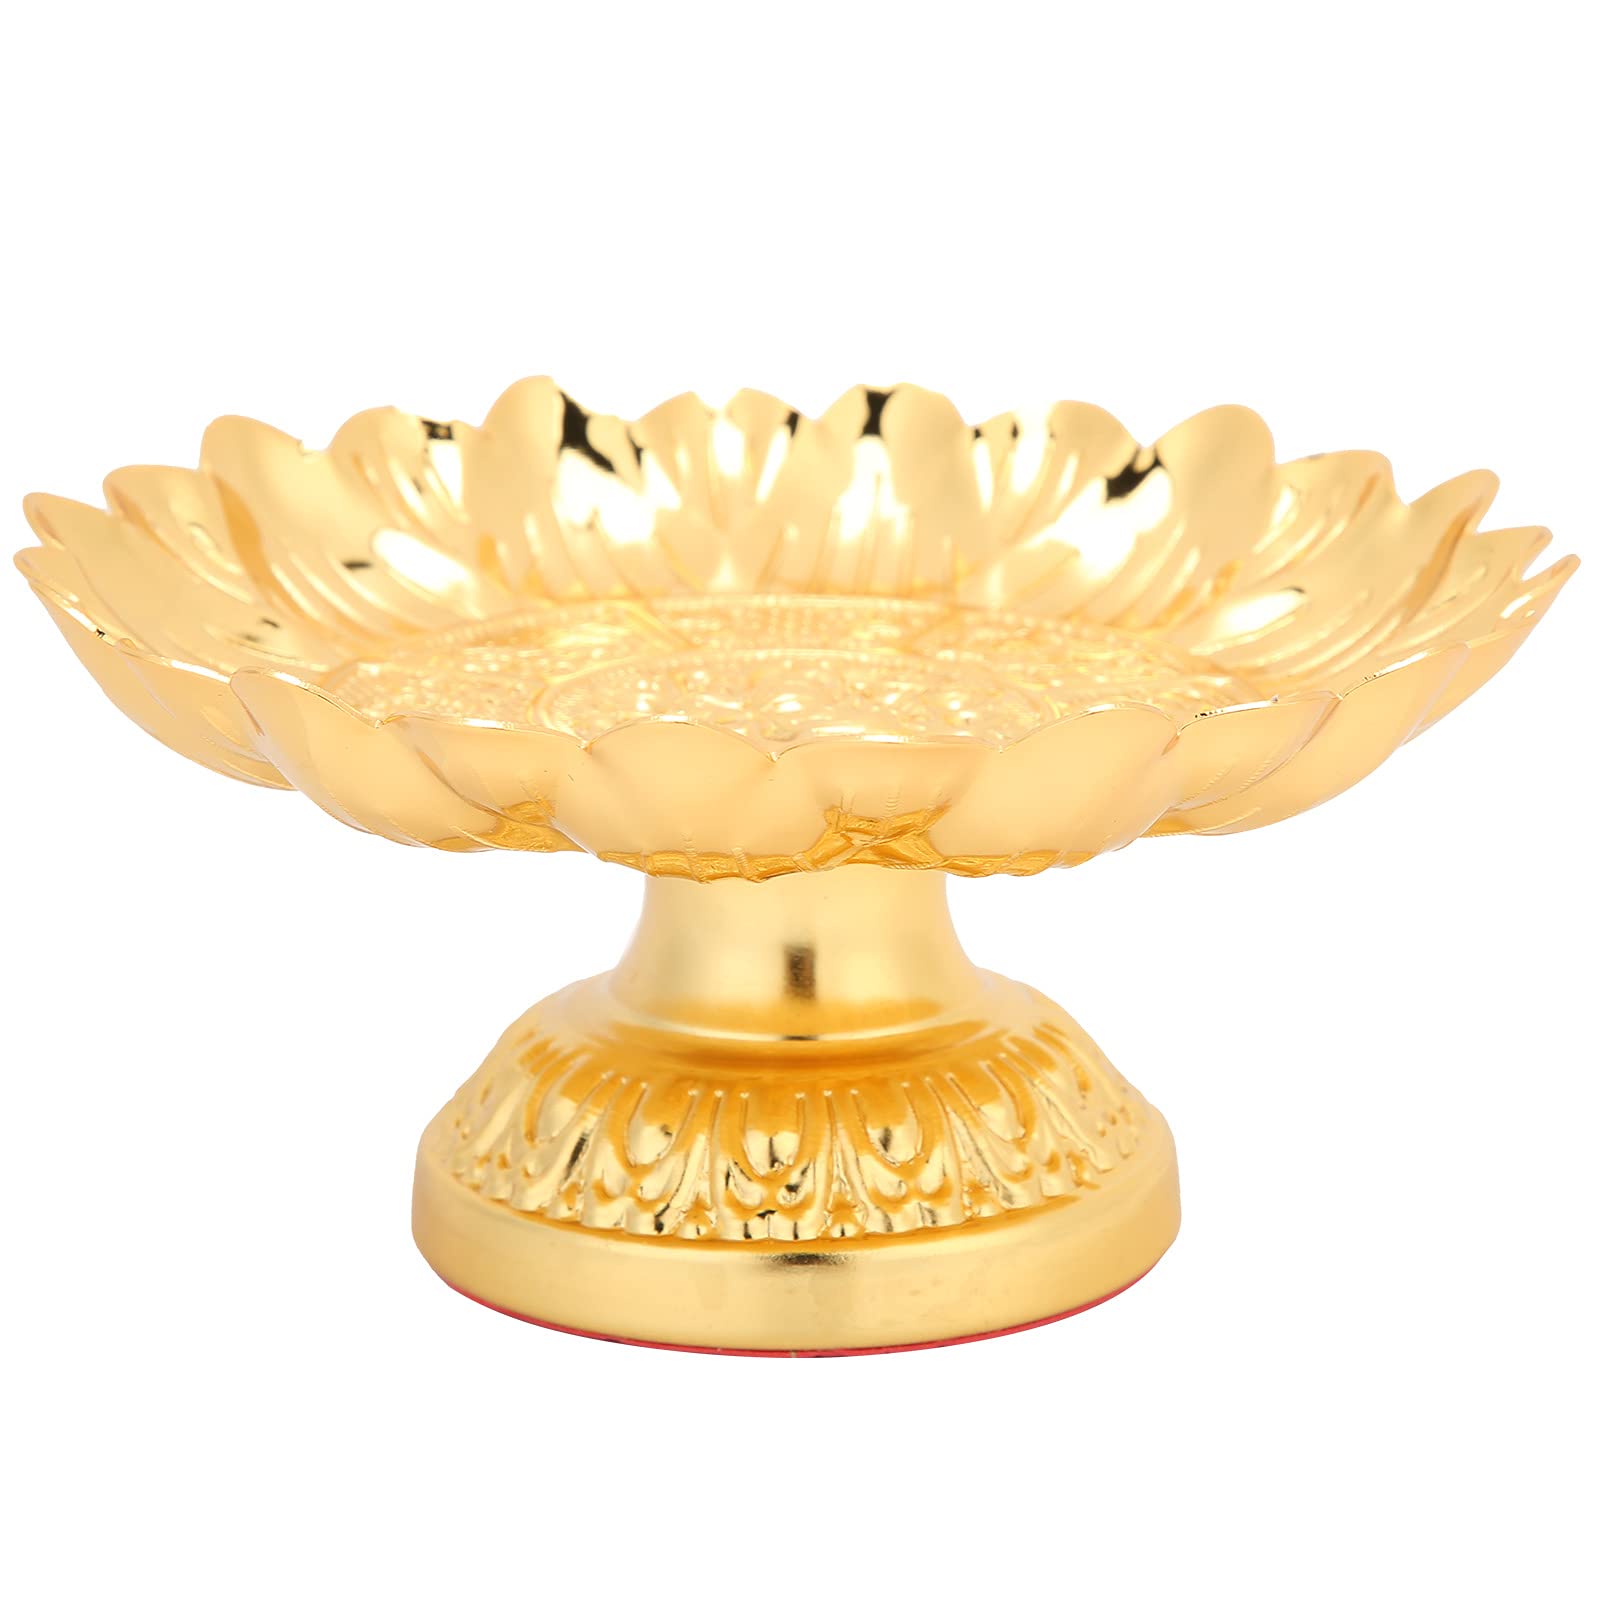 TOTITOM Fruit Plate Small Size High Capacity Carry Easily Delicacy Offering Bowl for Placing Fruit Worship Buddha Decorative Tray for home Decor